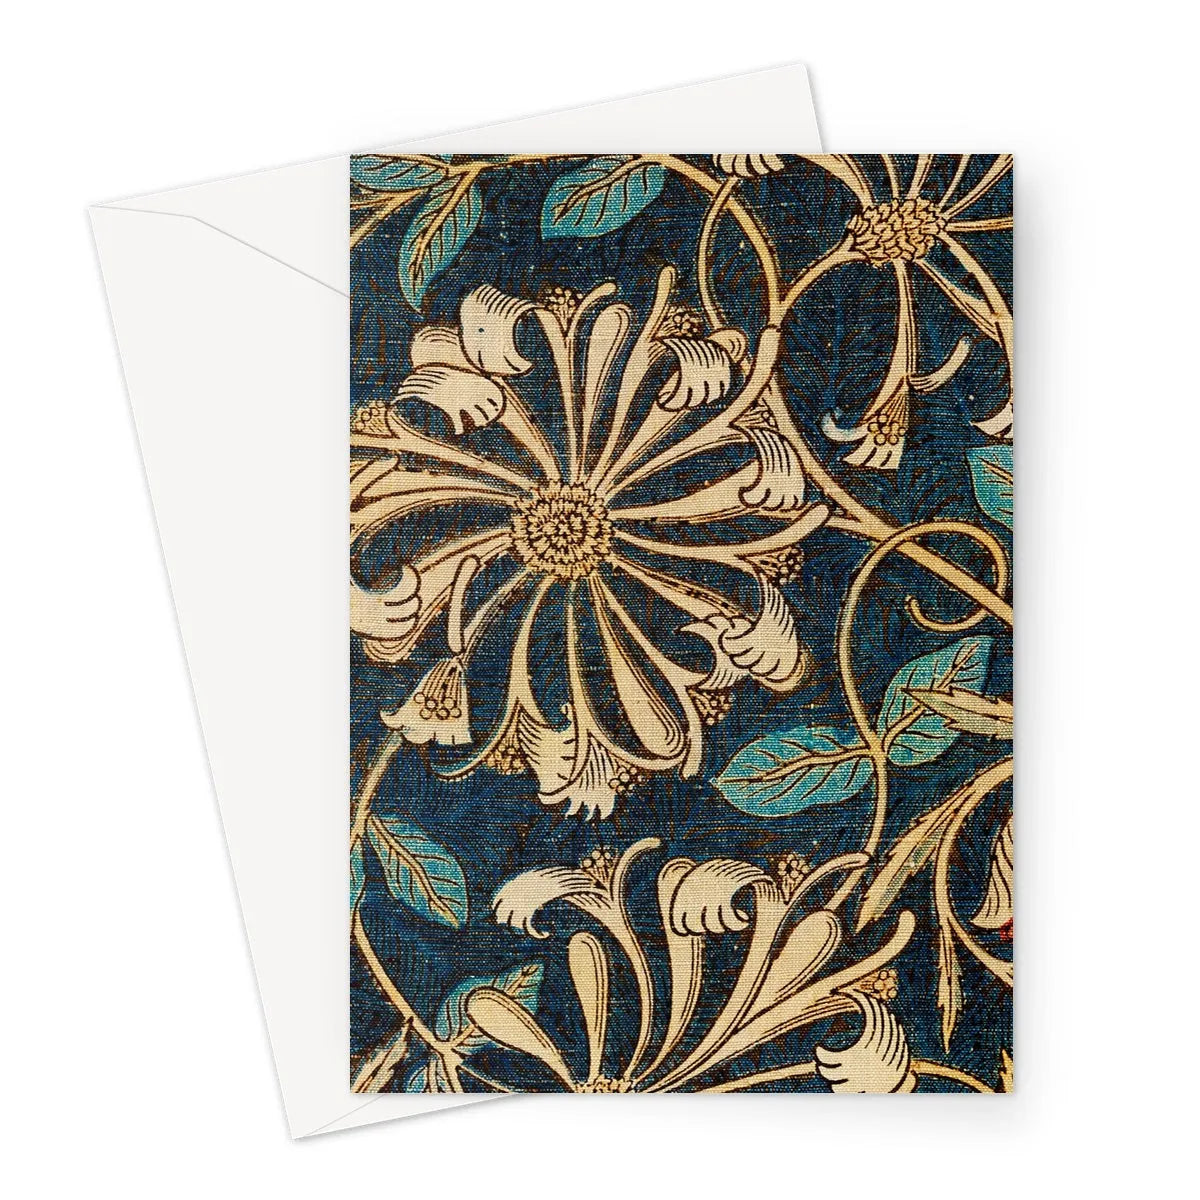 Honeysuckle 3 By William Morris Greeting Card - A5 Portrait / 1 Card - Greeting & Note Cards - Aesthetic Art